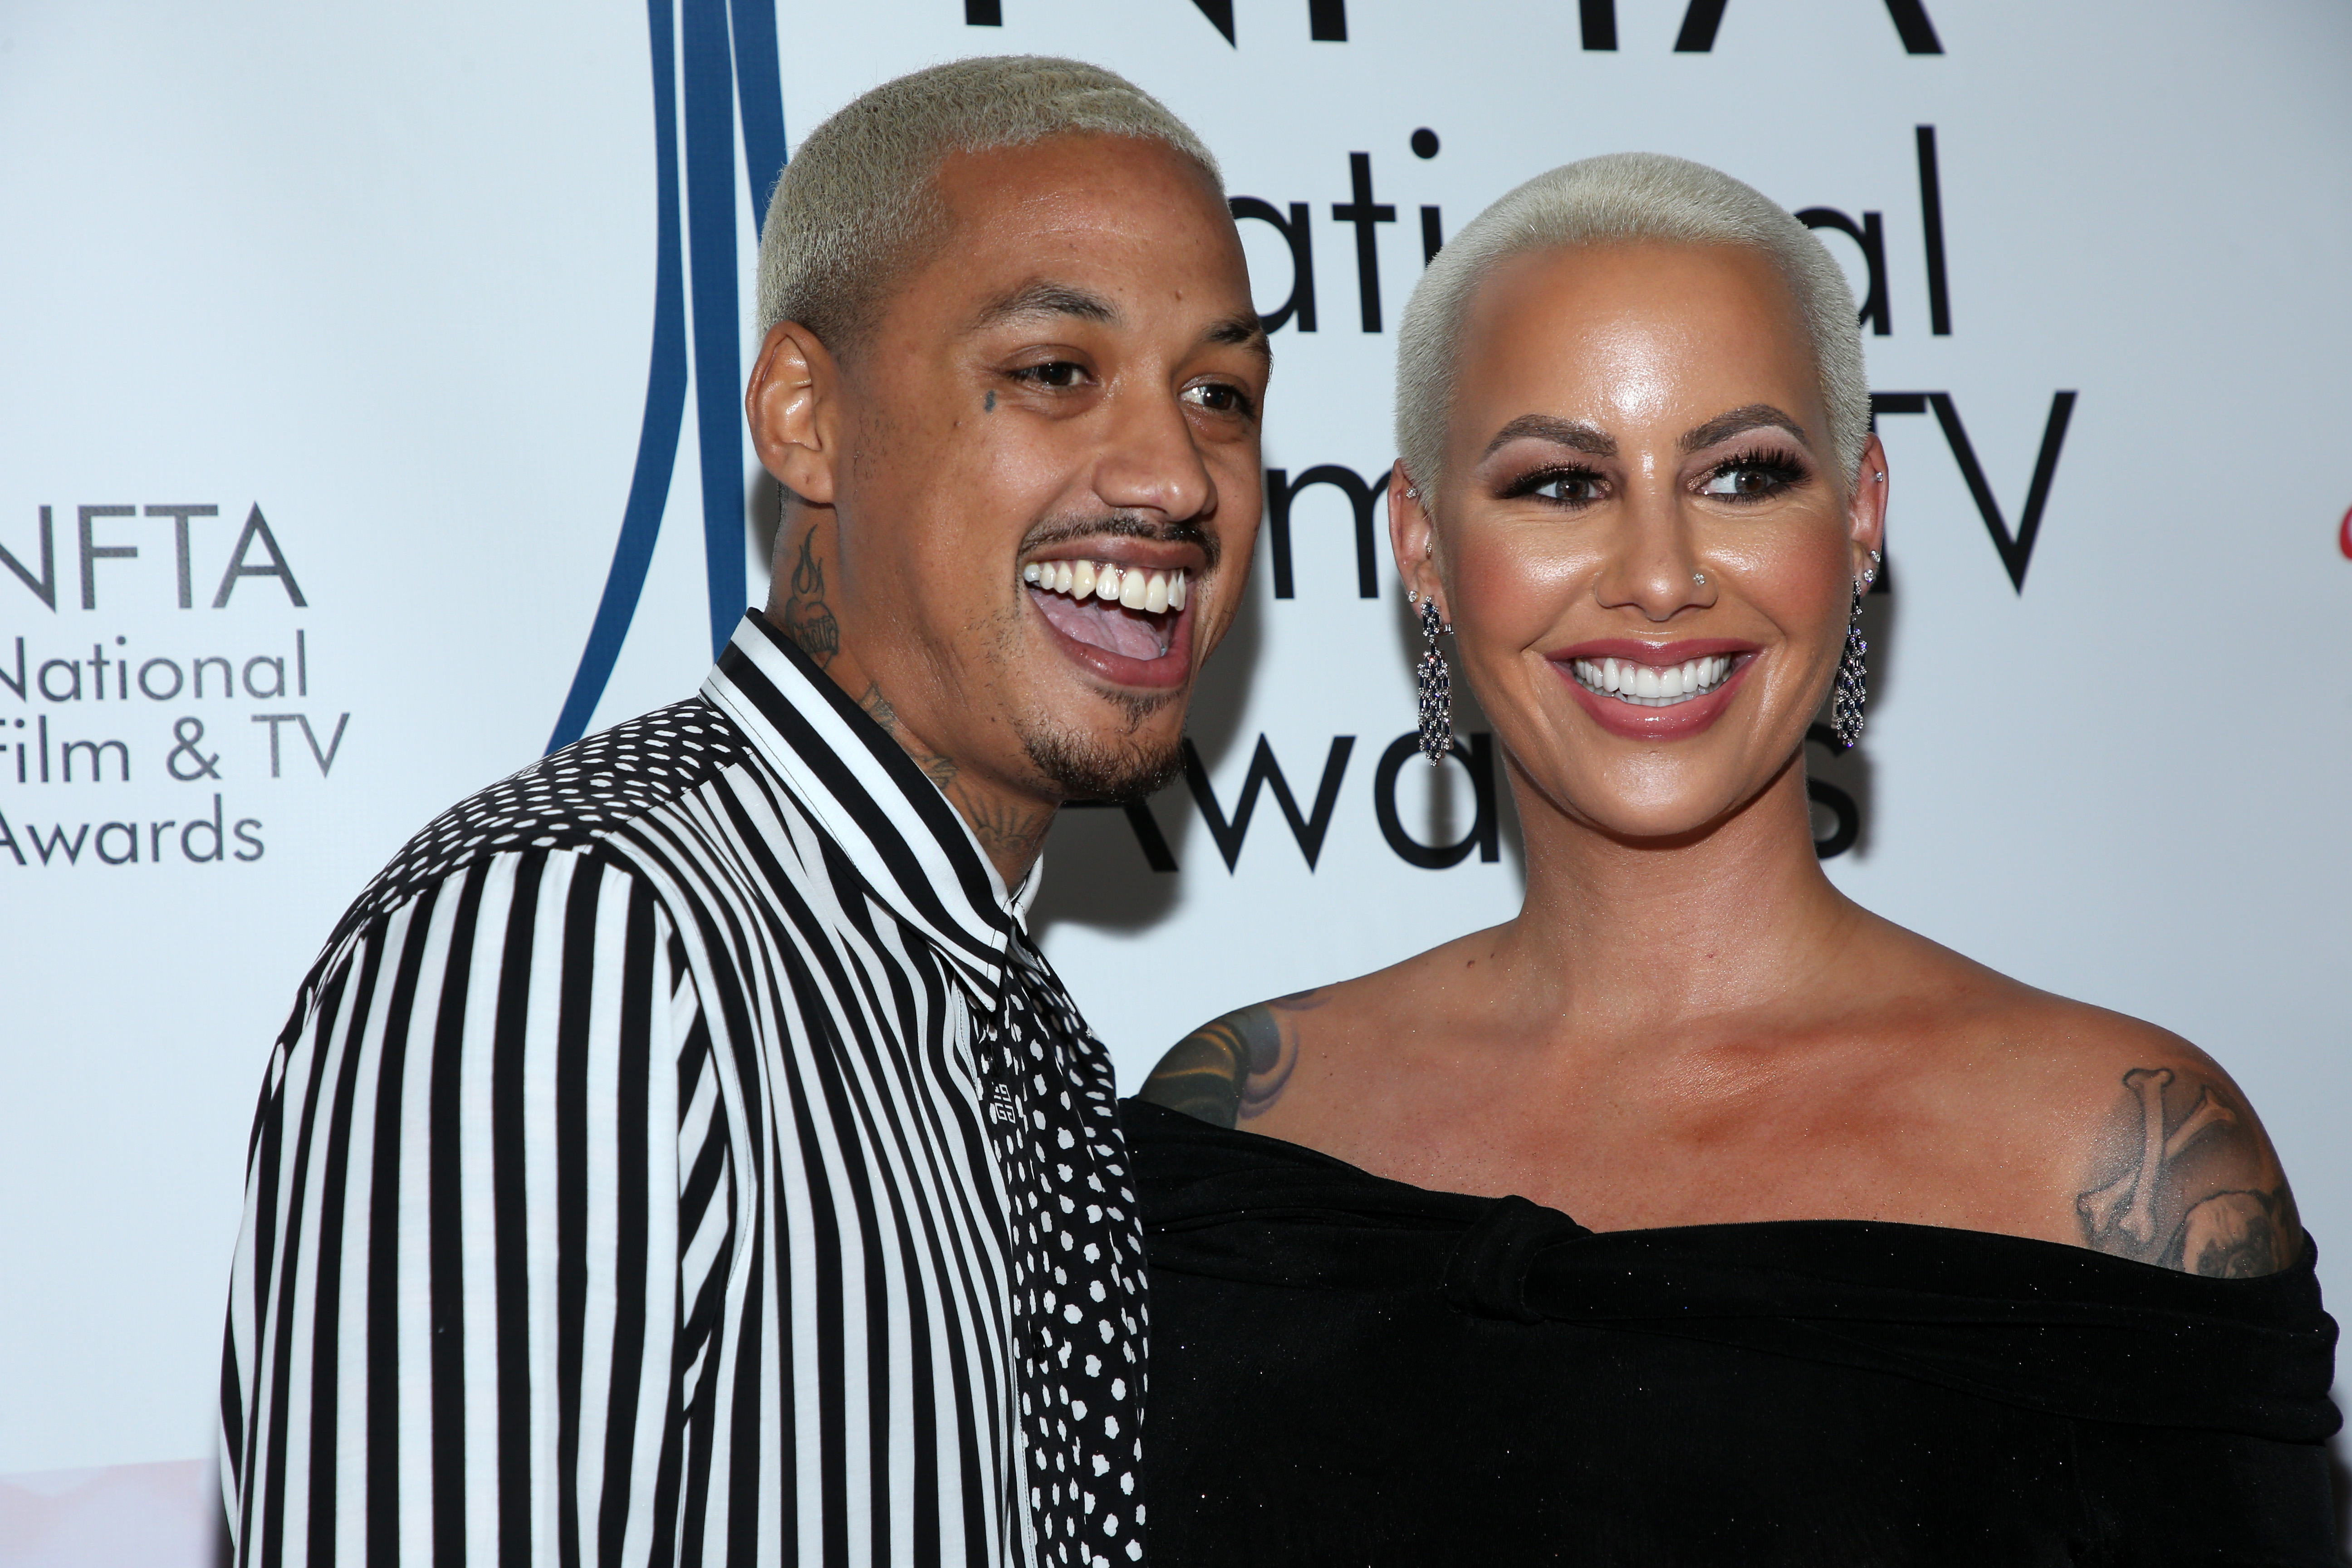 Amber Rose Announces She's Expecting a Baby Boy with Alexander Edwards